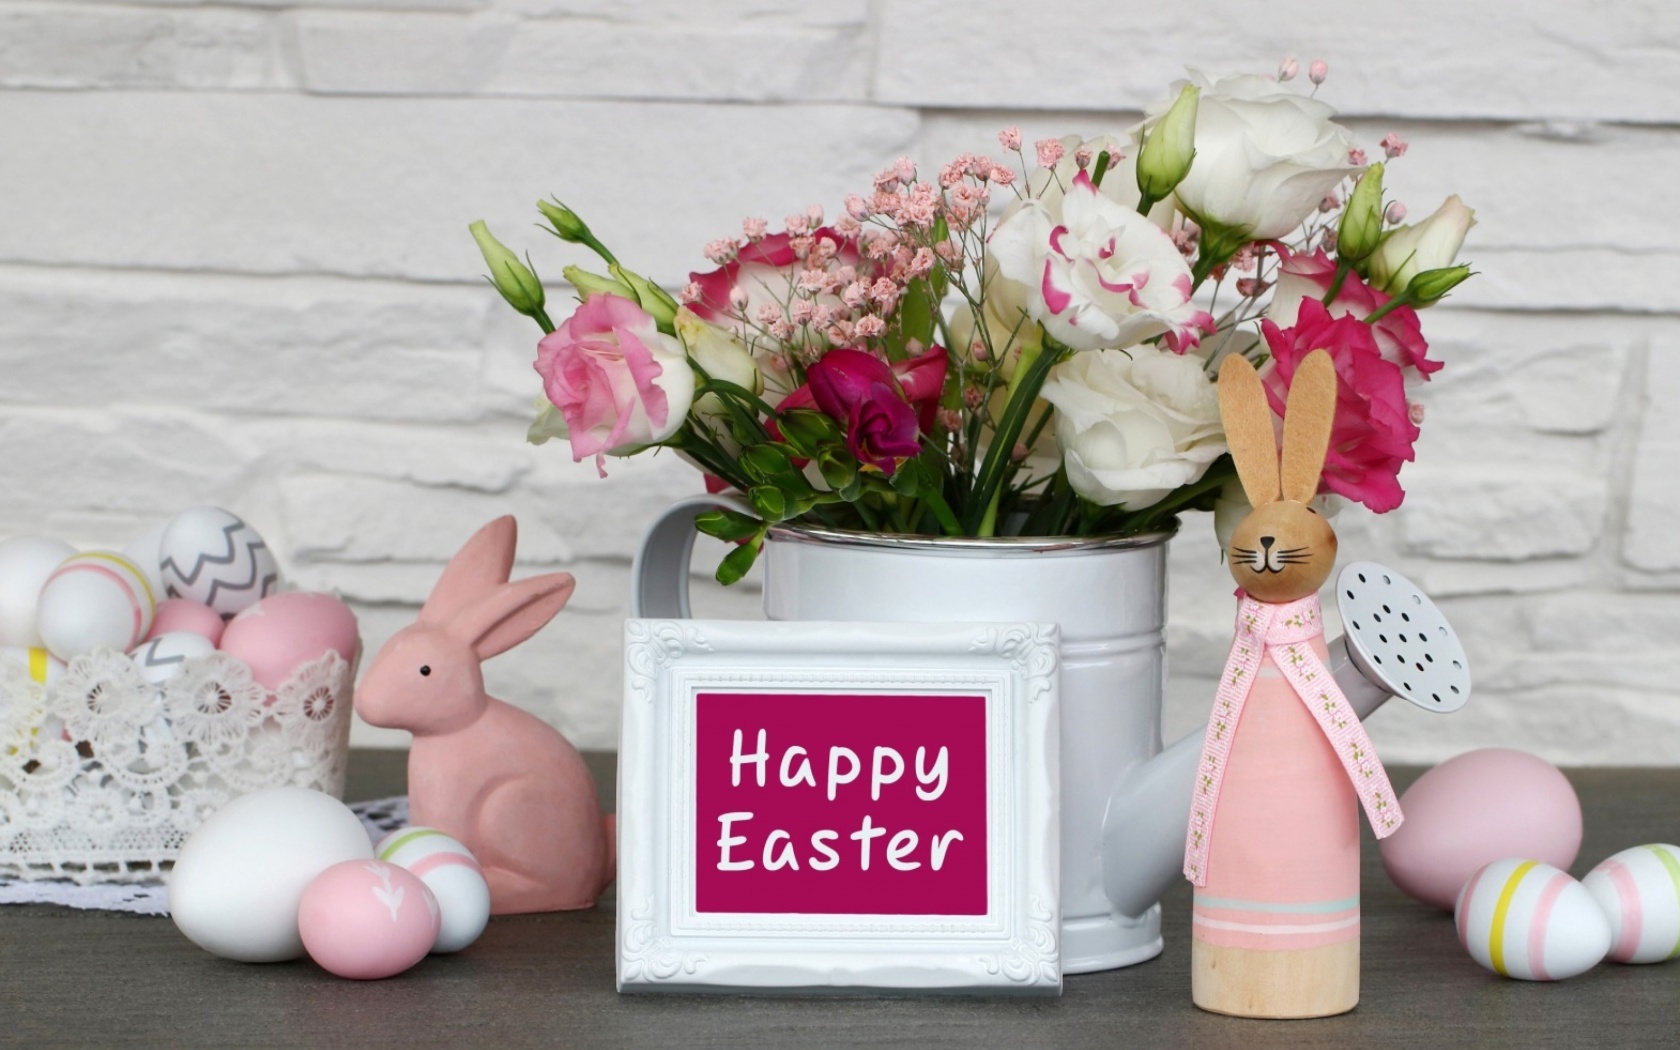 Das Happy Easter with Hare Figures Wallpaper 1680x1050